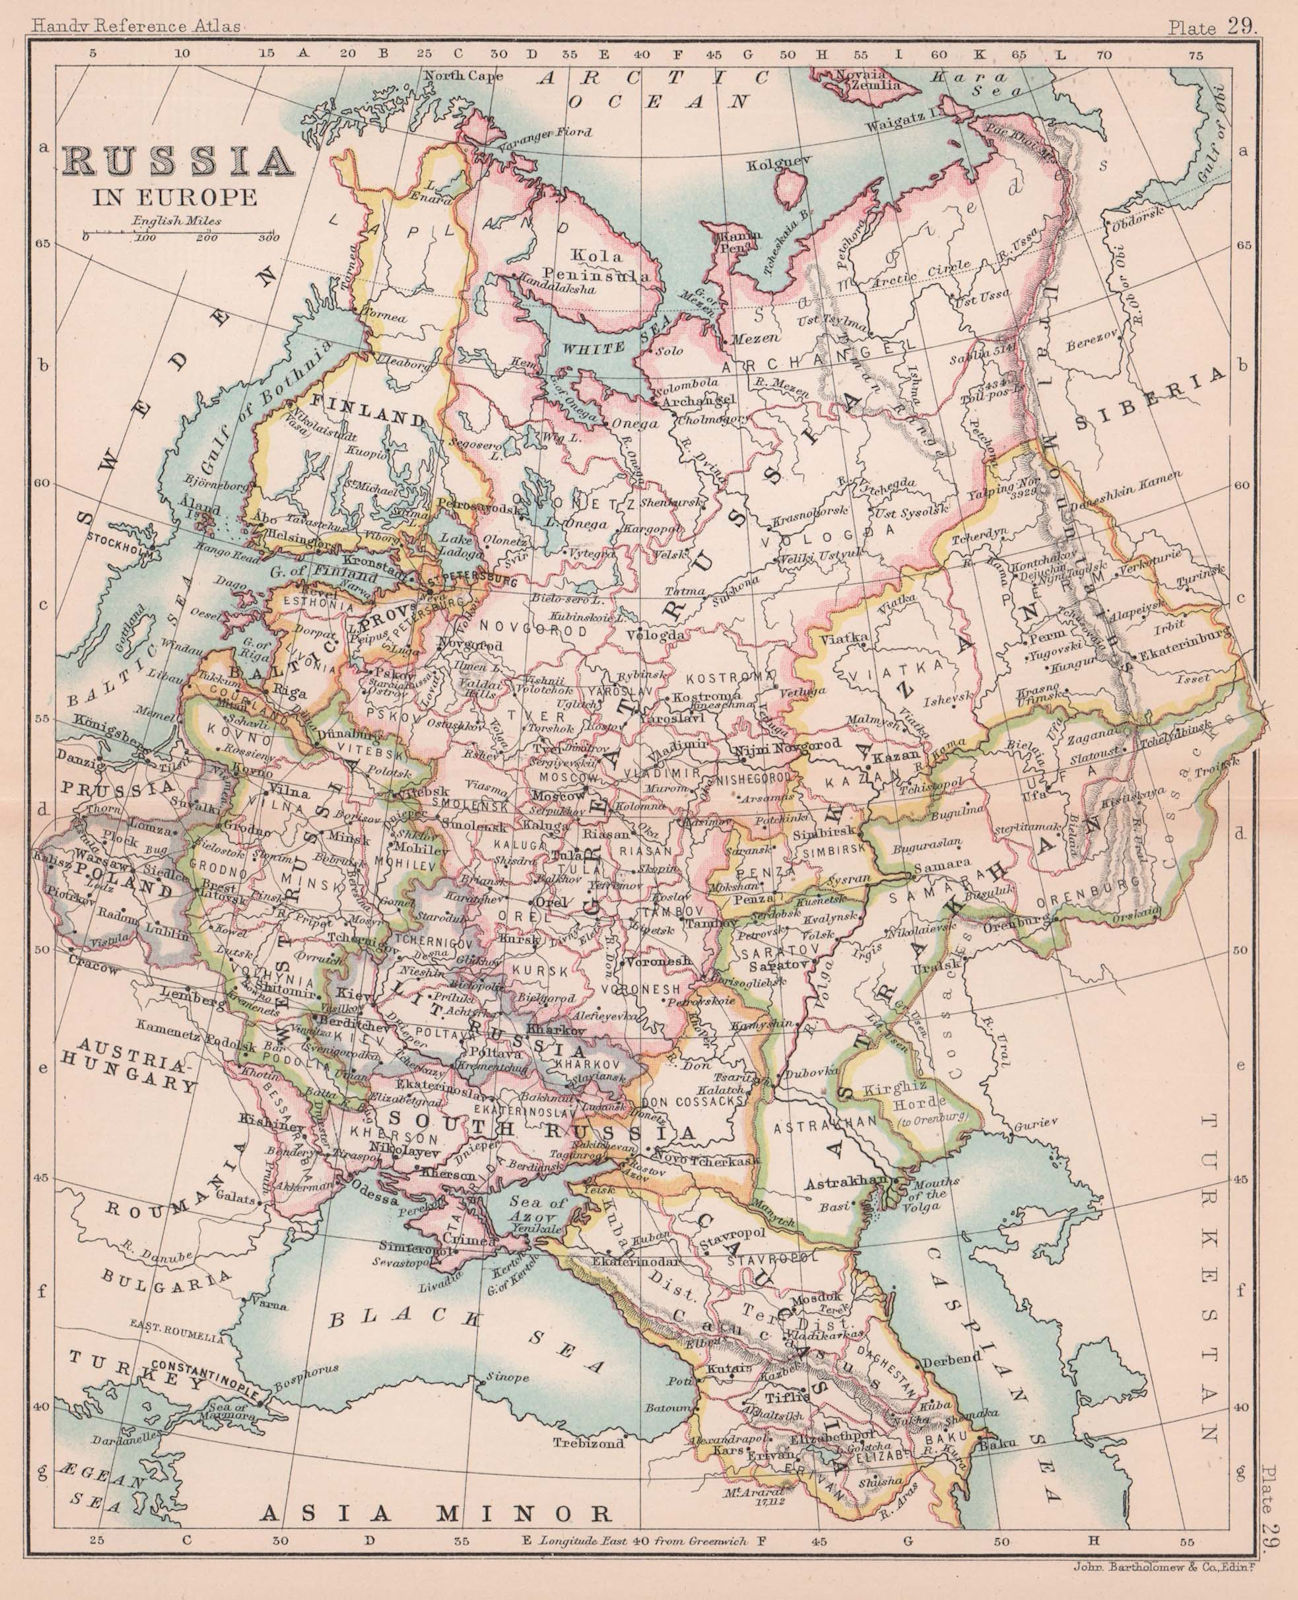 Associate Product Russia in Europe. Poland. West/Little/Great/South Russia. BARTHOLOMEW 1893 map